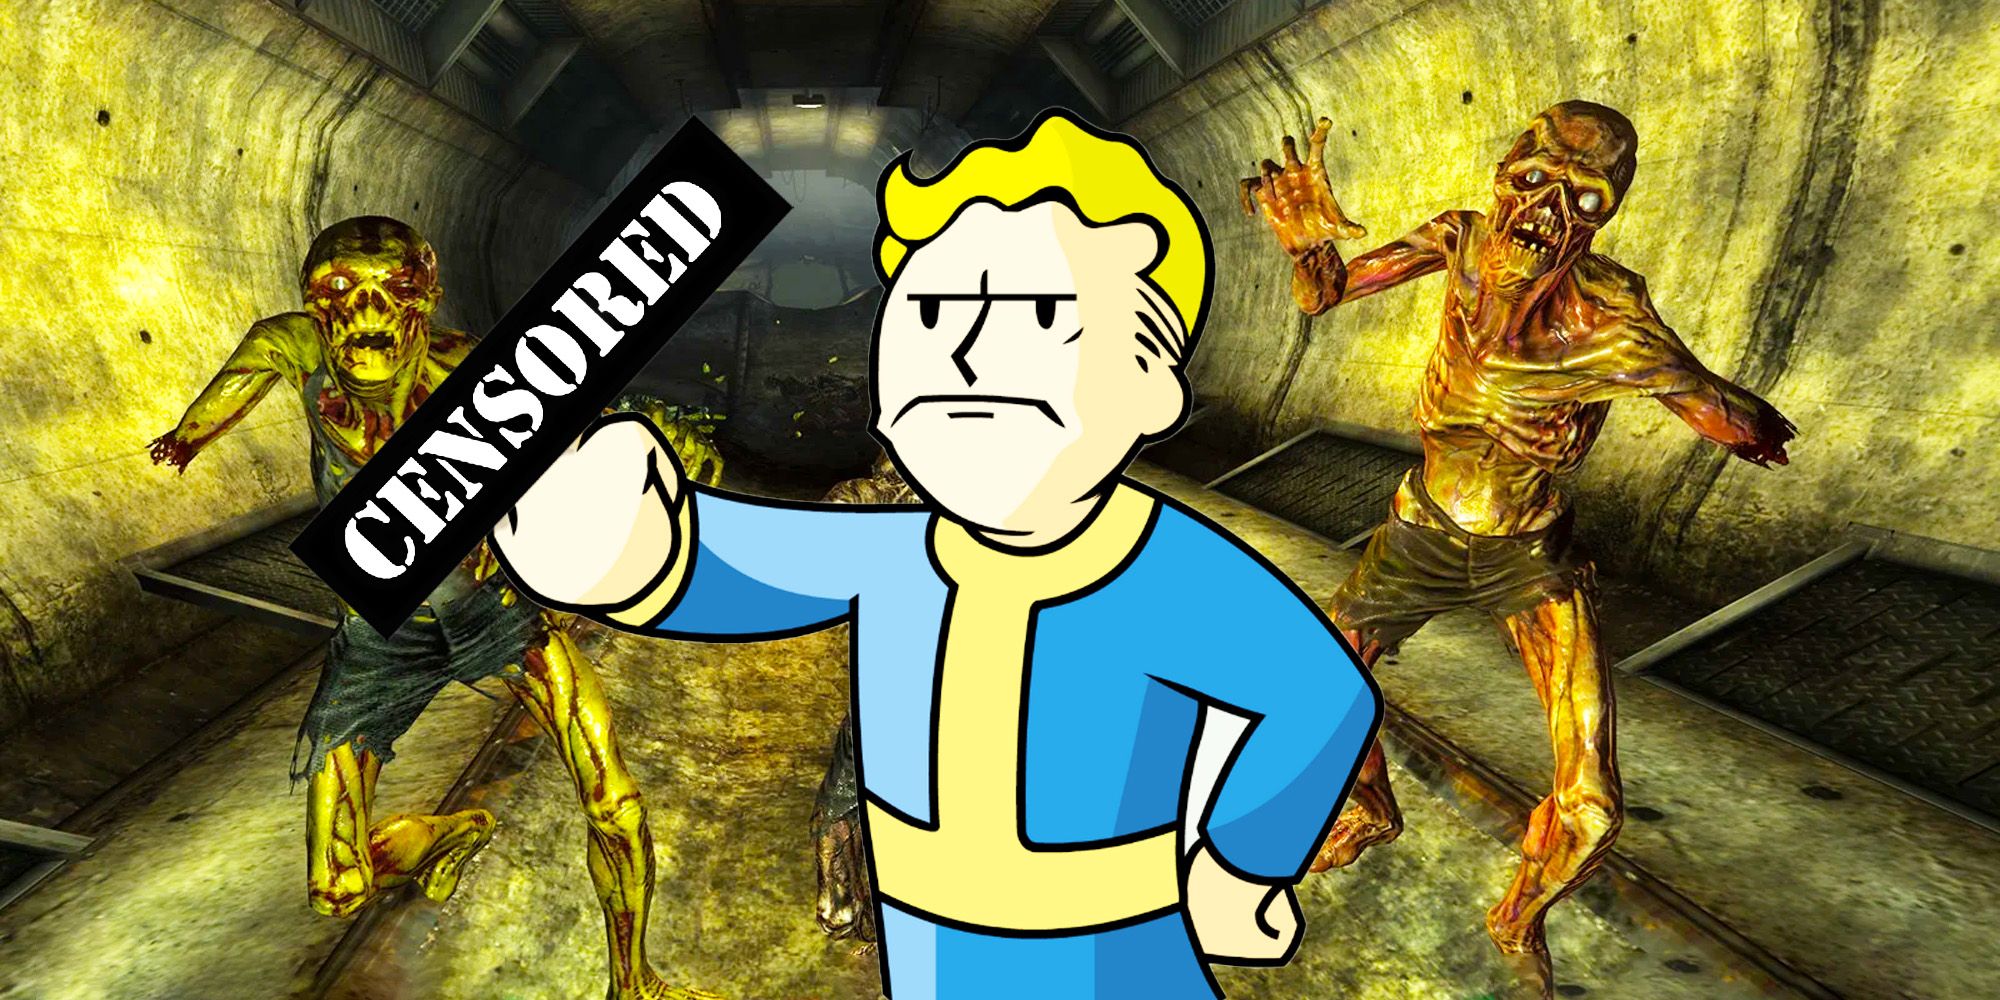 Amazon Prime Celebrates Its Fallout Series By Handing Out Yet Another Free Game